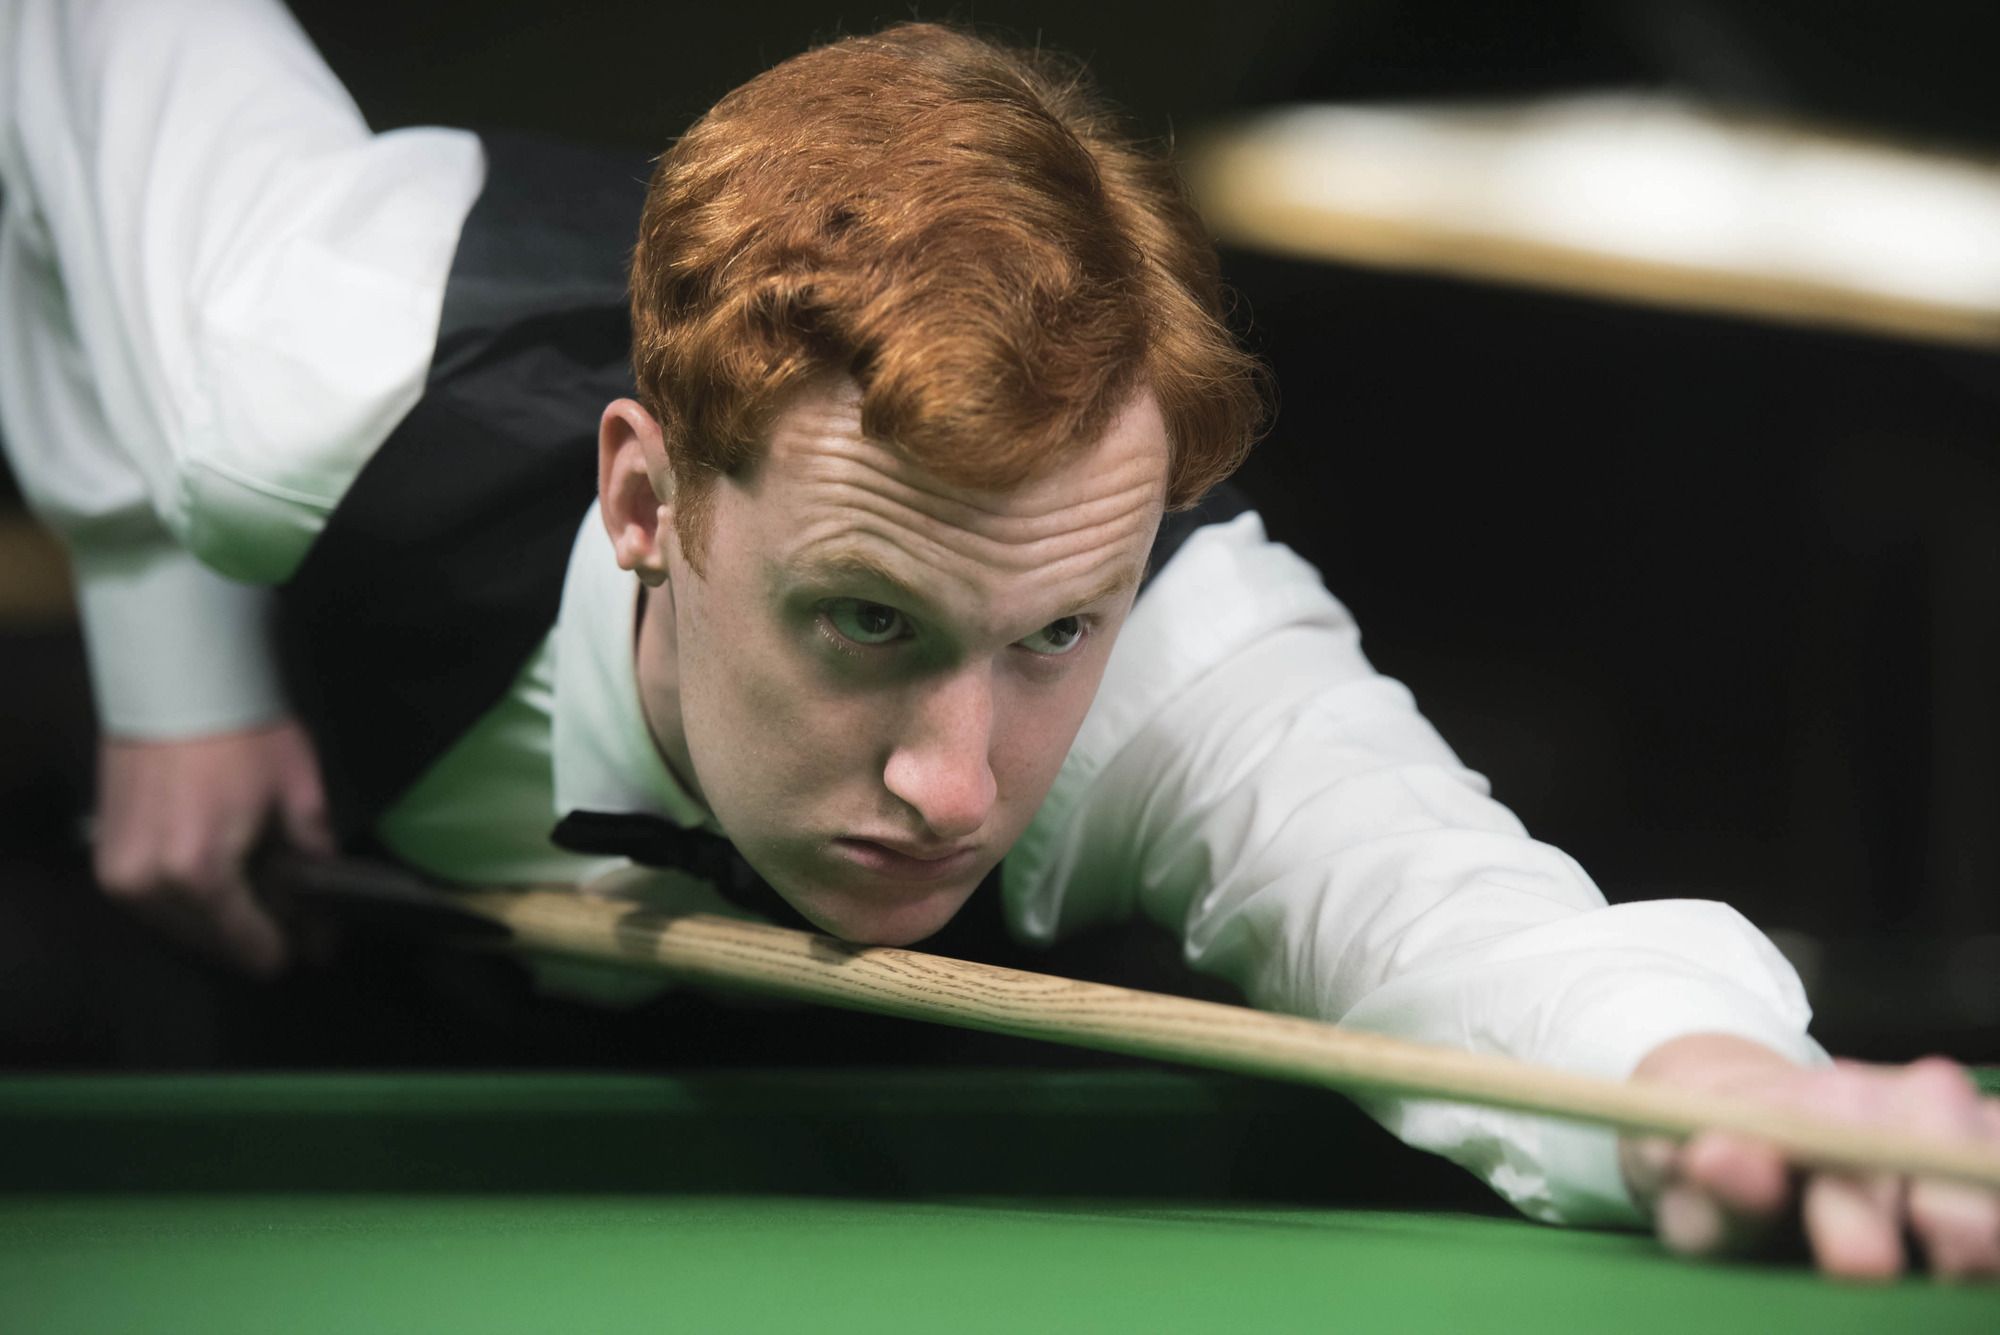 The Rack Pack BBC iPlayer snooker biopic comes to BBC Two